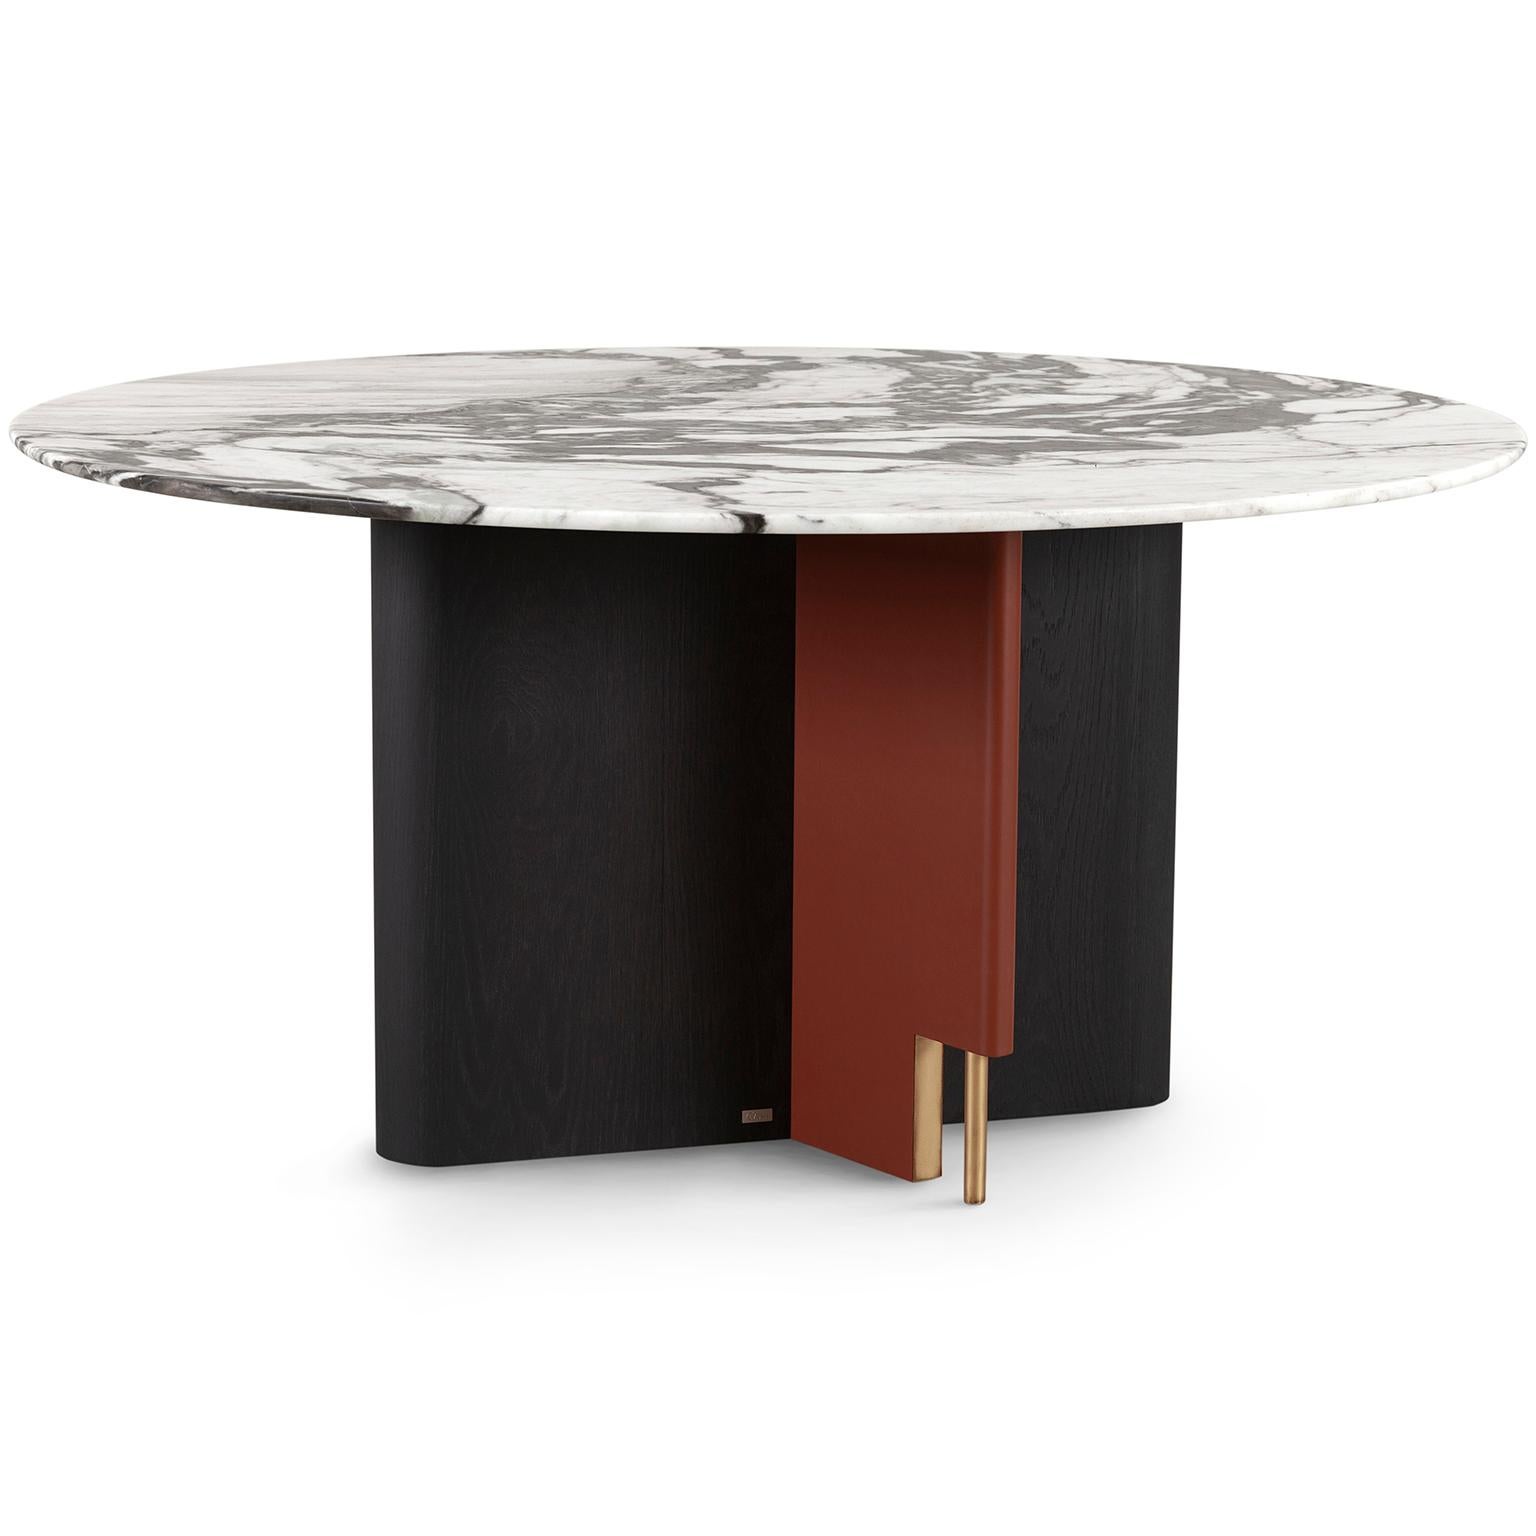 Ferreirinha Dining Table, Contemporary Collection, Handcrafted in Portugal - Europe by Greenapple.

Designed by Rute Martins for the Contemporary Collection, the Ferreirinha marble dining table pays homage to the lasting legacy of Antónia Adelaide